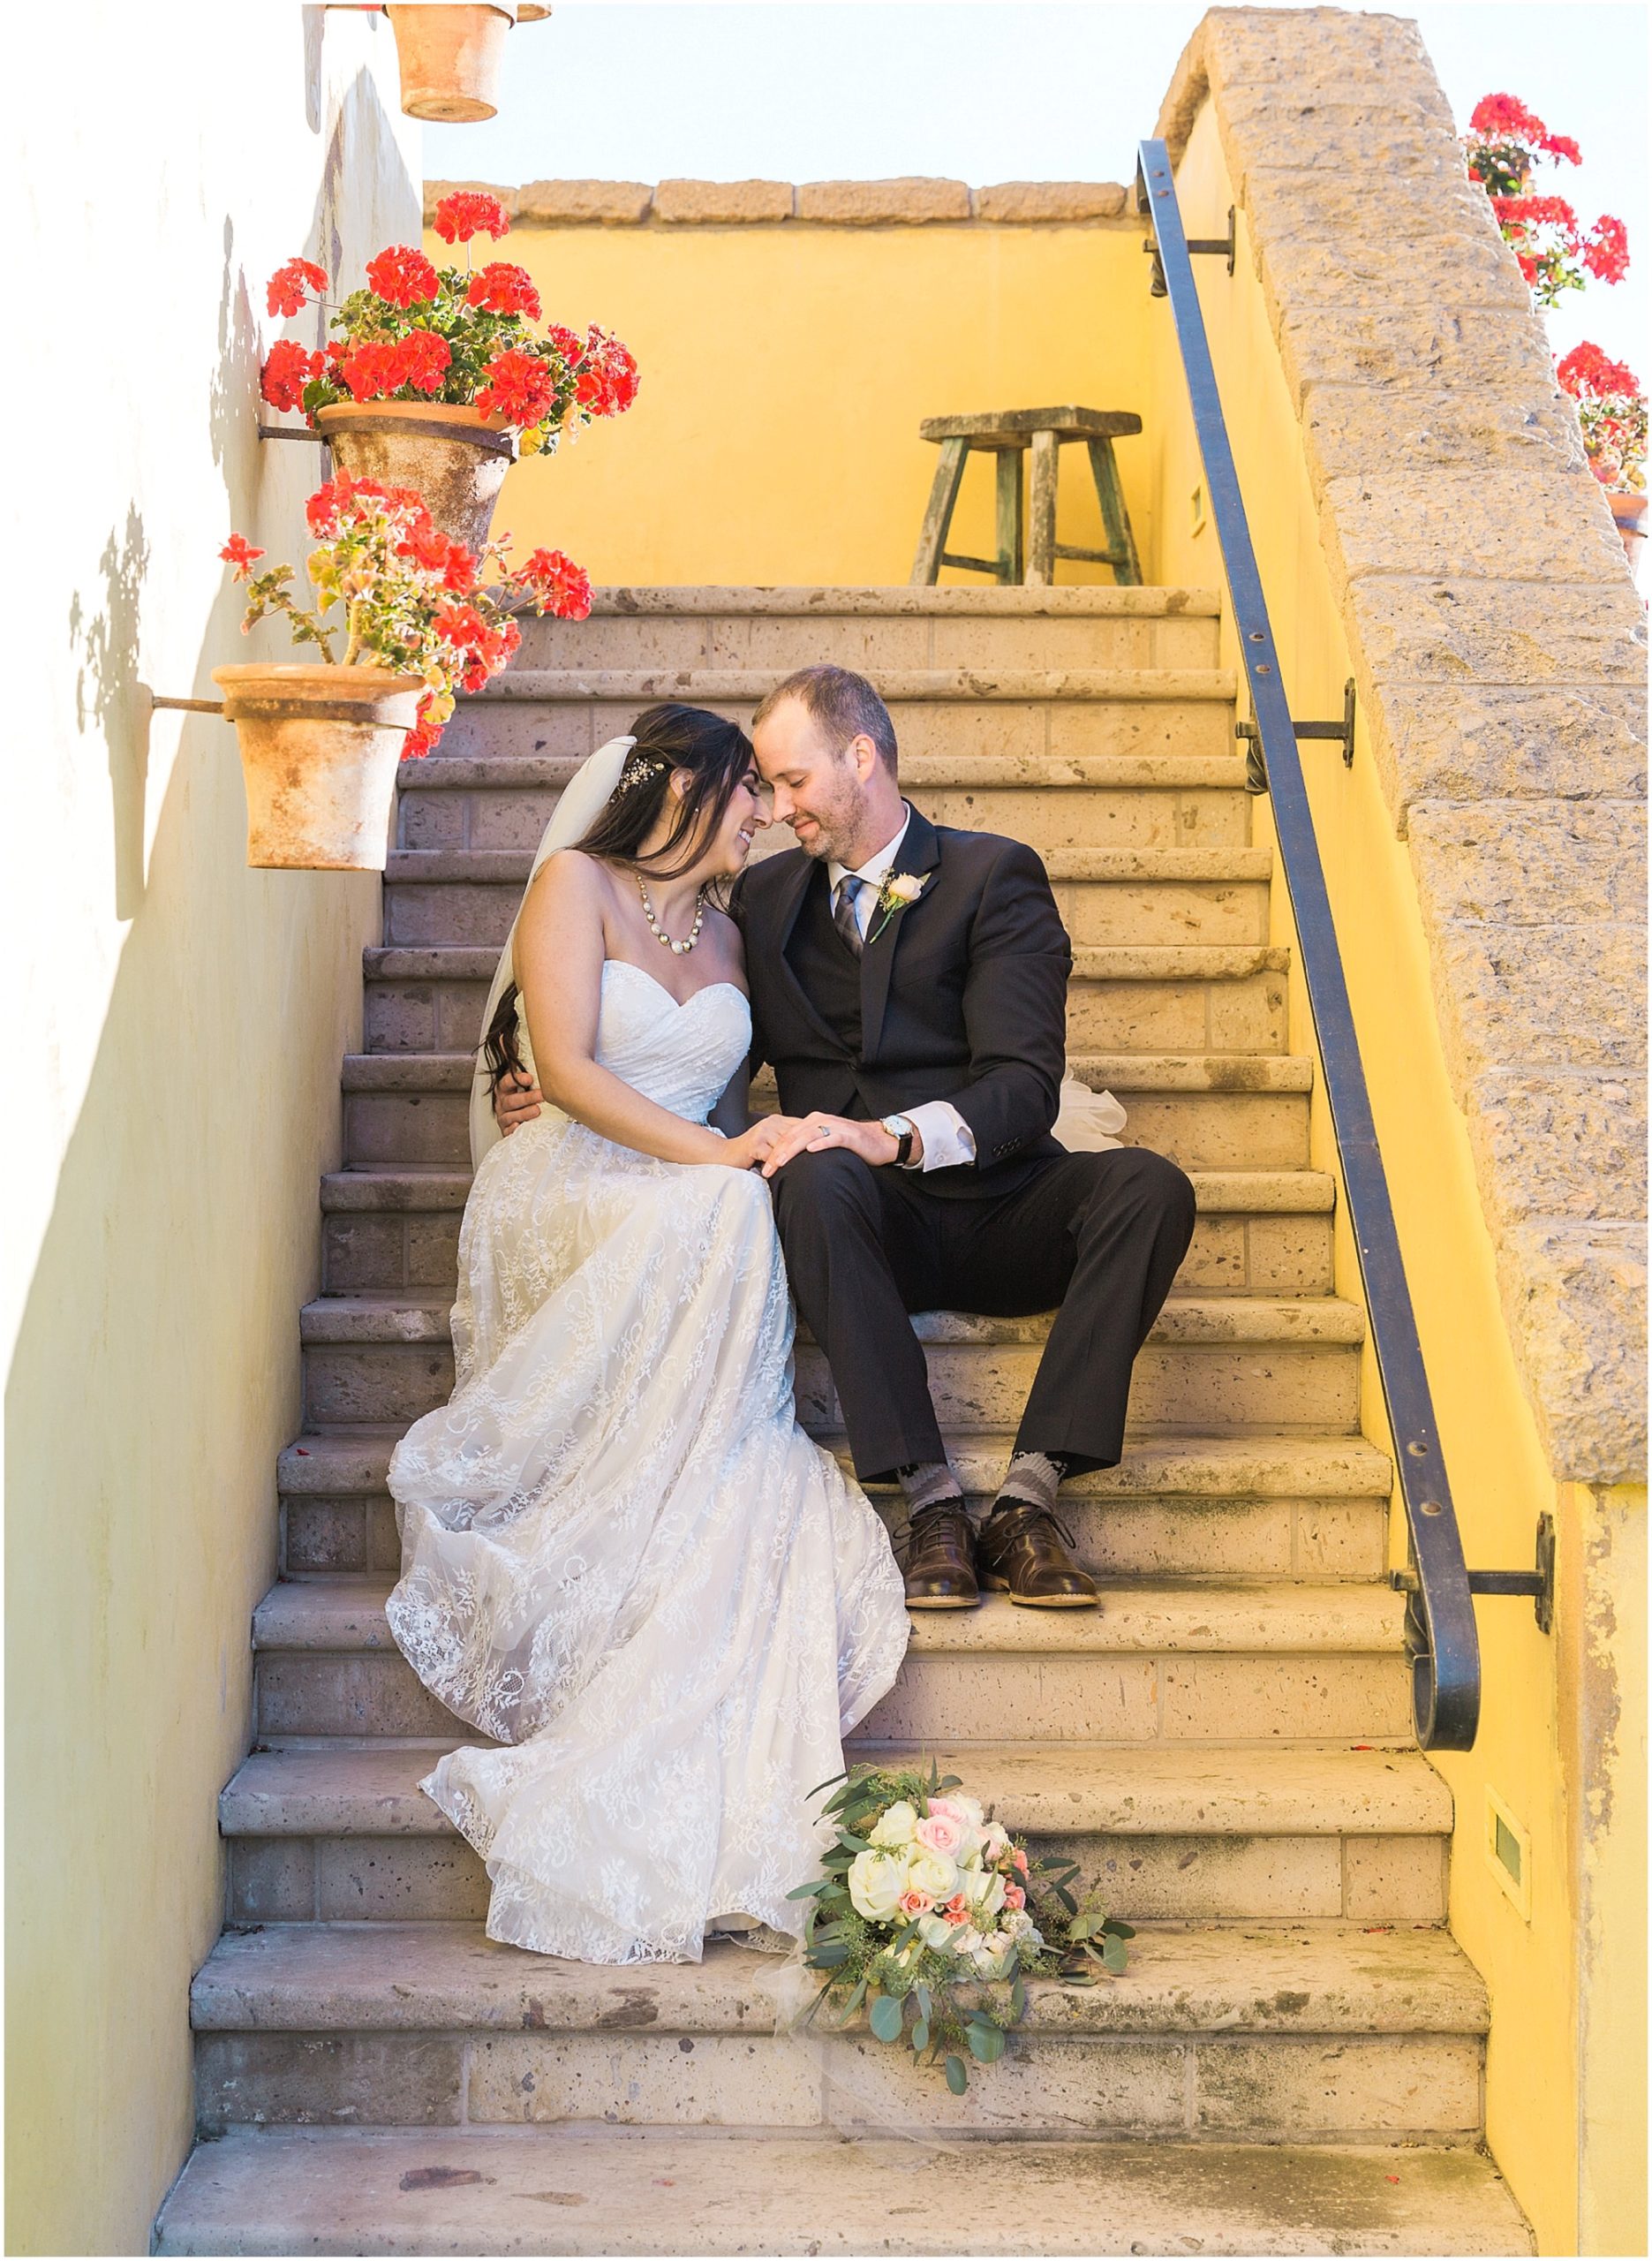 The gorgeous stone staircase of the Tuscan Stables at Ranch at the Canyons is a beautiful spot for a romantic couples portrait near this Smith Rock wedding venue in Oregon. | Erica Swantek Photography